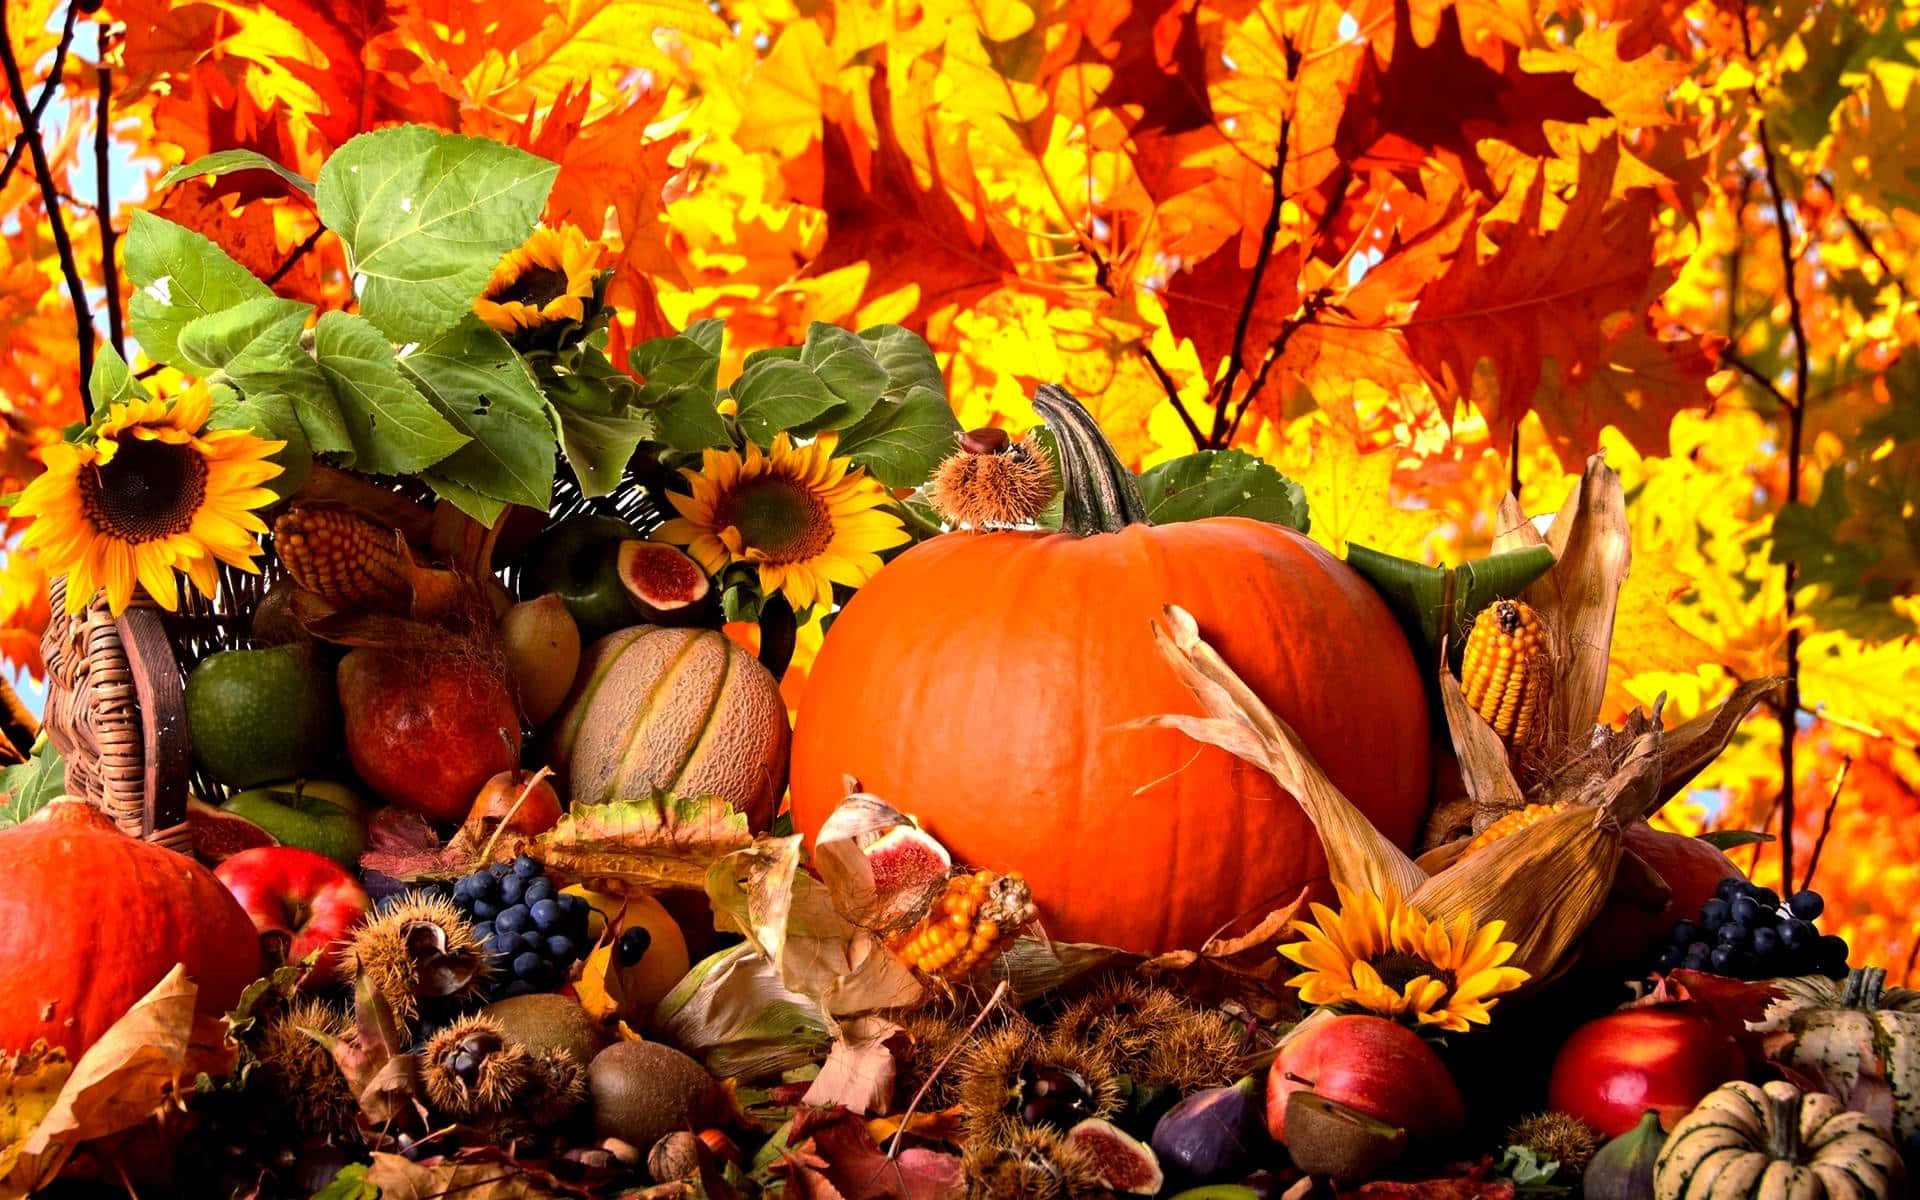 High Resolution Fall Fruits Vegetables And Flowers Harvest Wallpaper